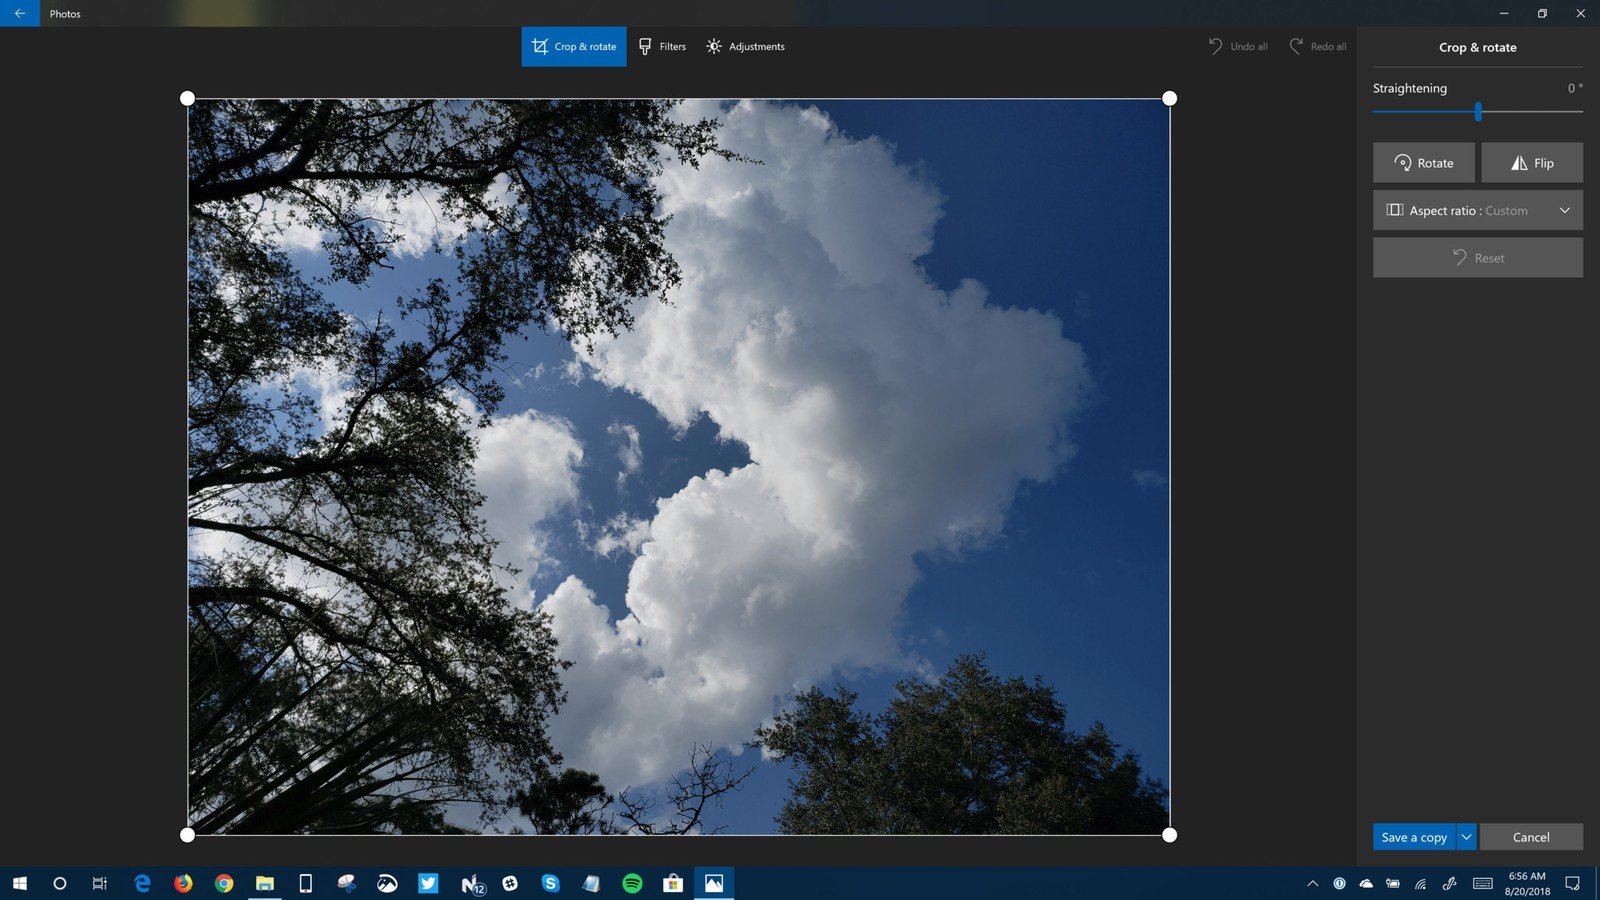 Microsoft Photos app for Windows 10 updated with hardware acceleration support